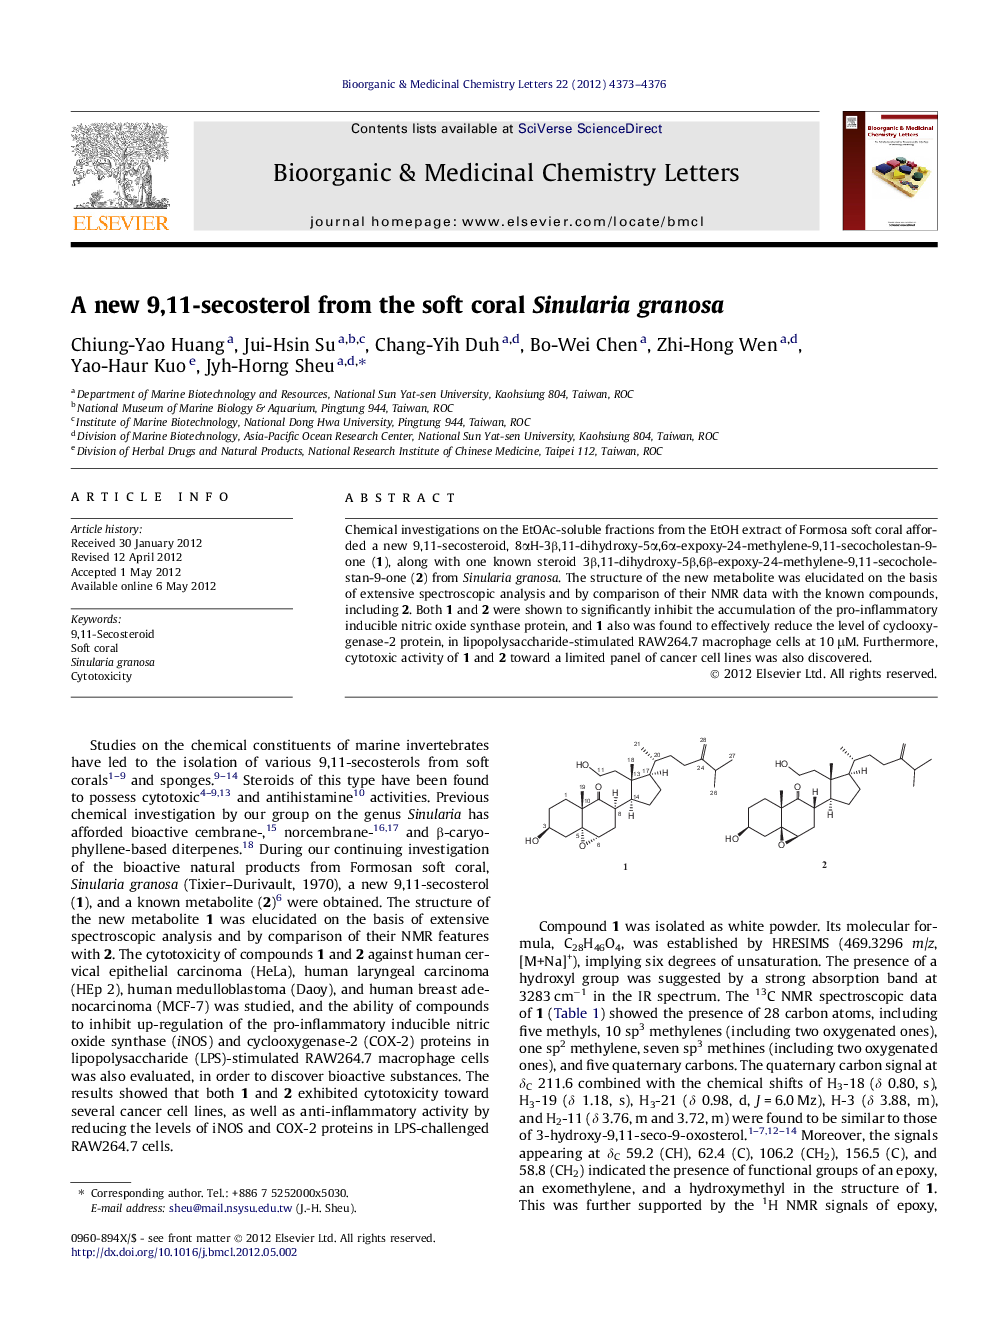 A new 9,11-secosterol from the soft coral Sinularia granosa